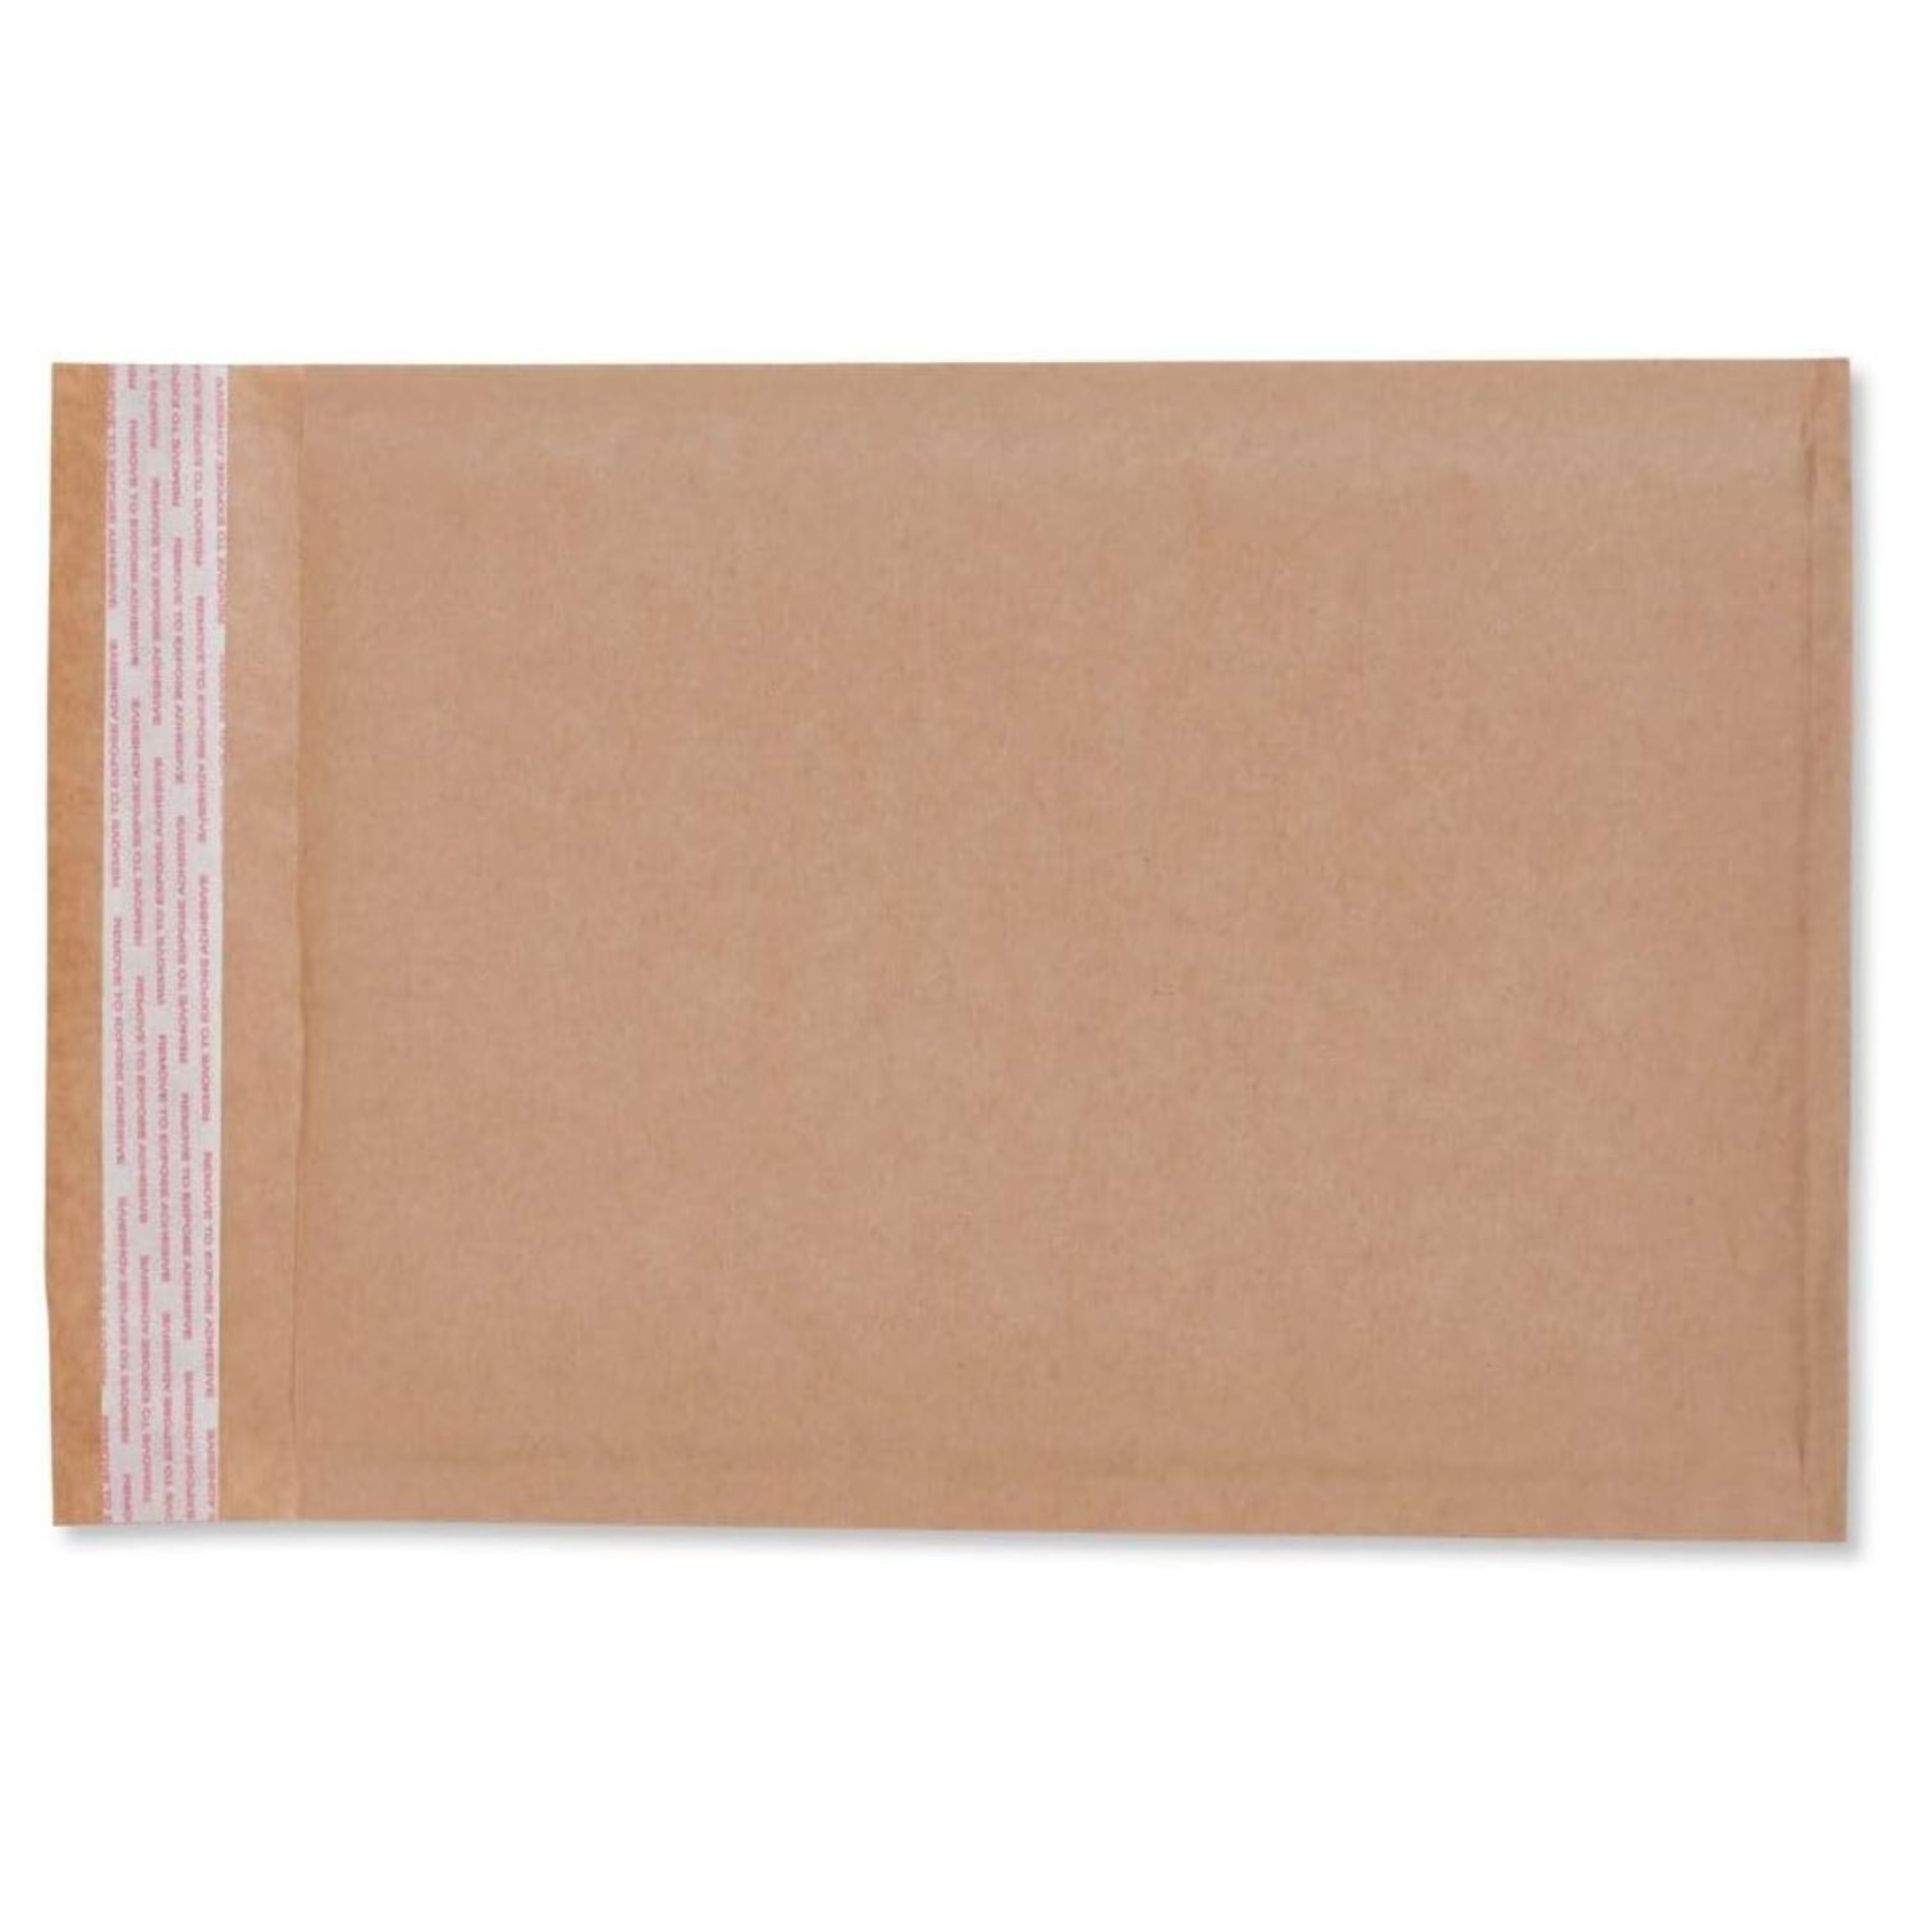 10 BOXES OF PAPER BAG ENVELOPES BUBBLE BAGS 100 PACK PEEL AND SEAL TOUGH LIGHT PADDED (120 X 165MM) - Image 4 of 4